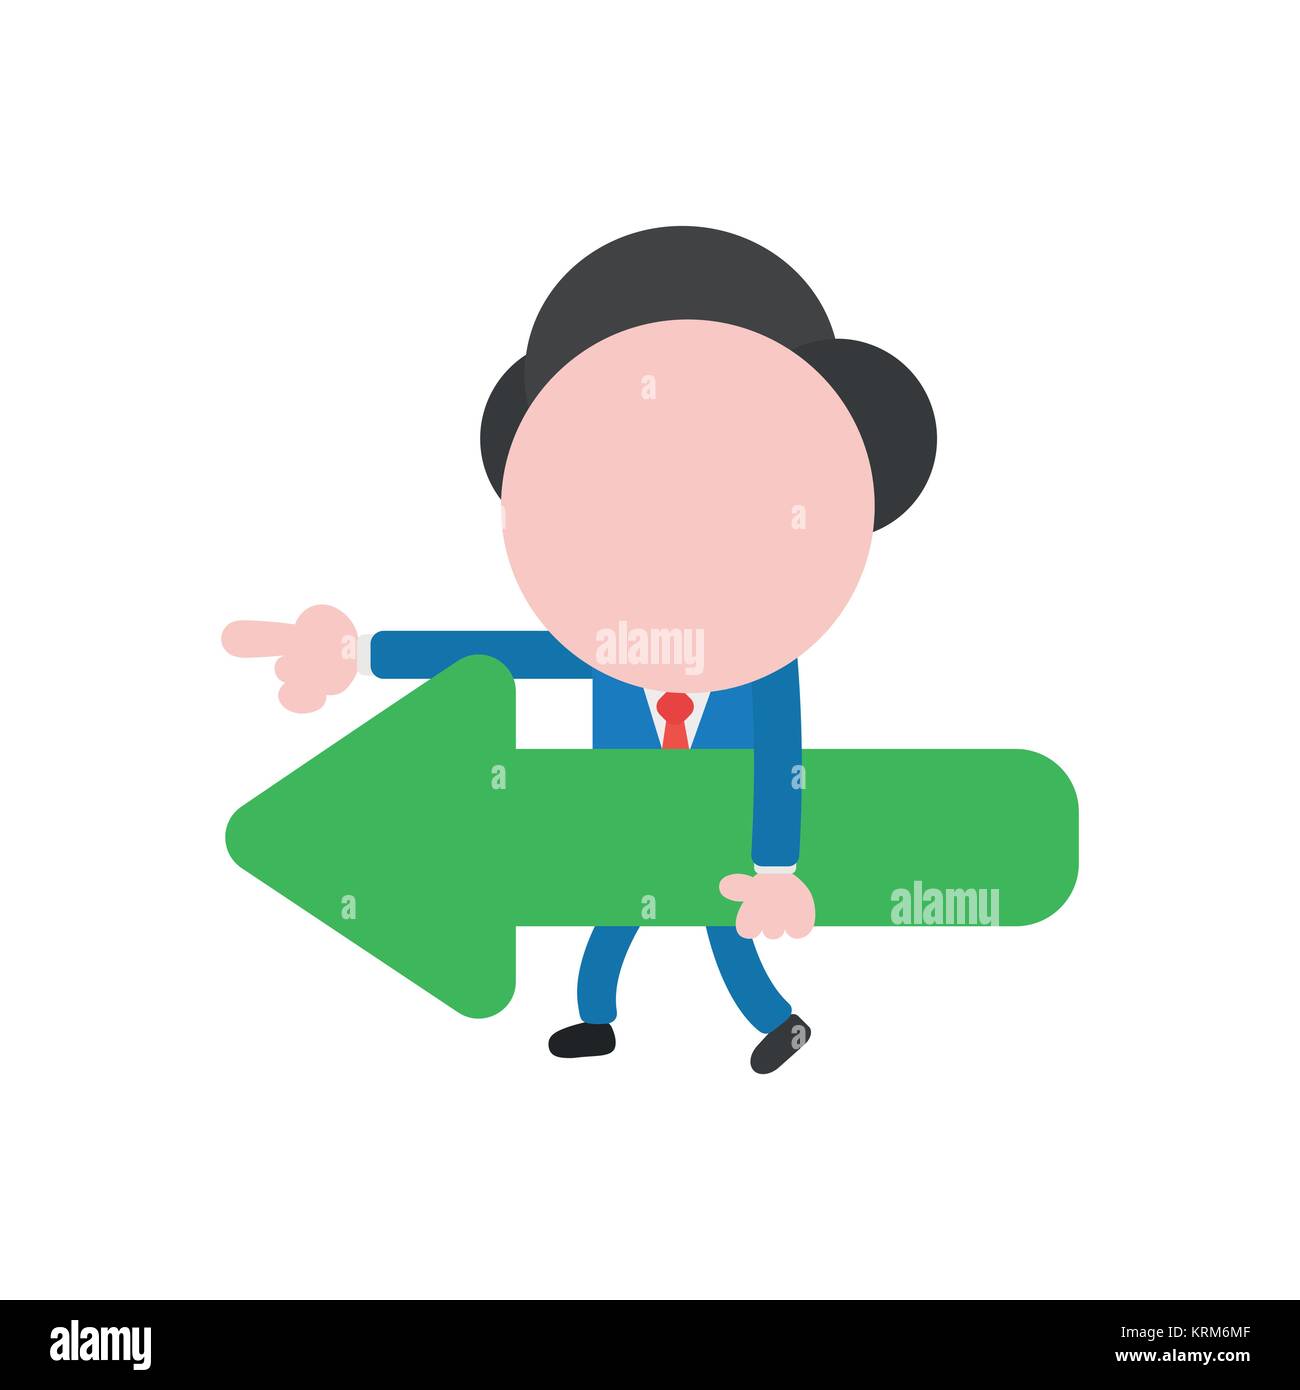 Vector cartoon illustration concept of faceless businessman mascot character walking, carrying green arrow symbol icon pointing left. Stock Vector